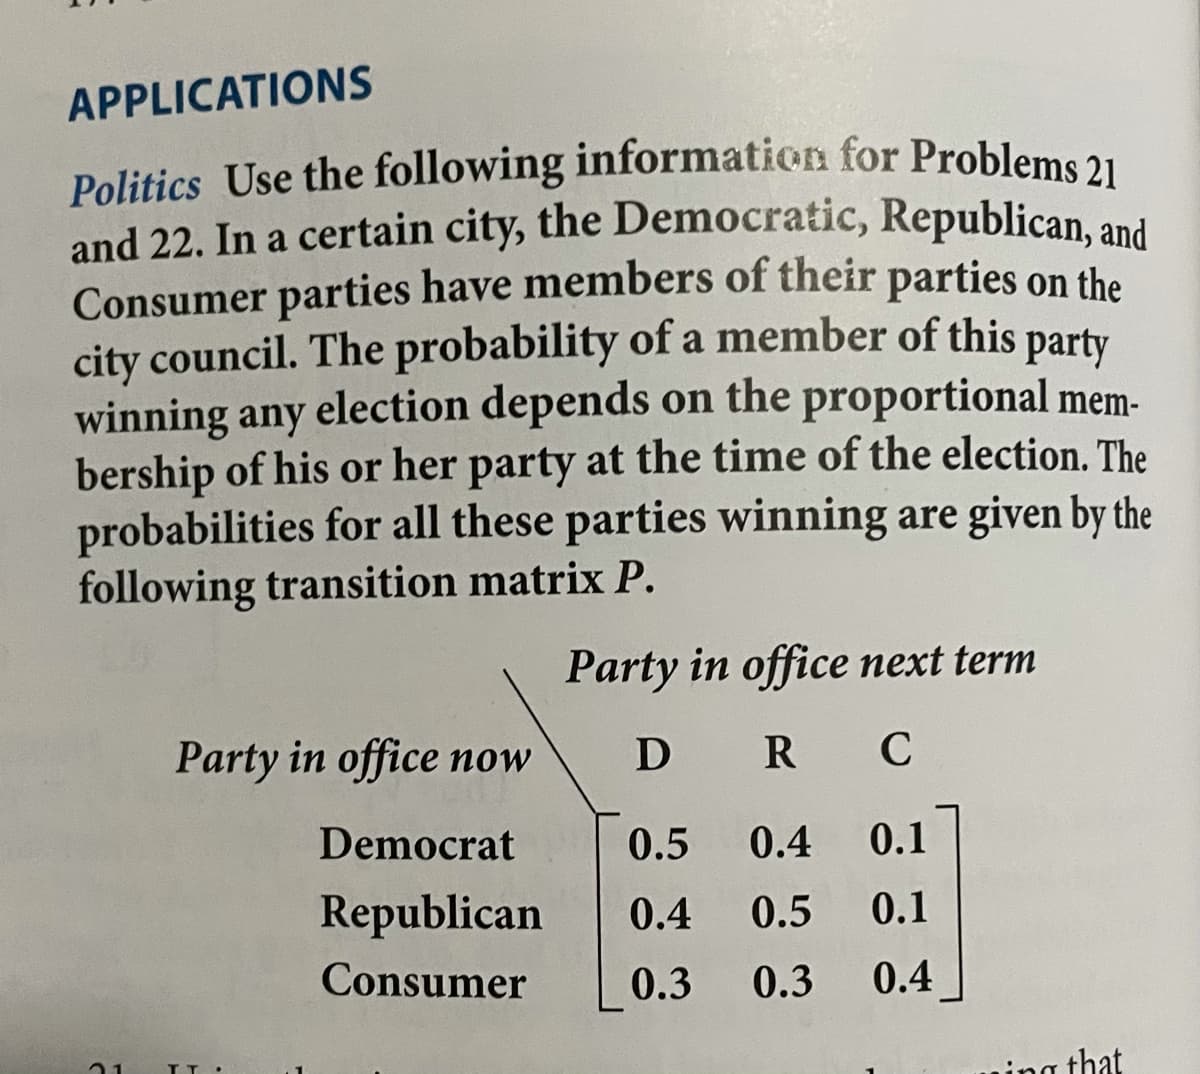 Politics Use the following information for Problems 21
APPLICATIONS
and 22. In a certain city, the Democratic, Republican, and
Consumer parties have members of their parties on the
city council. The probability of a member of this
winning any election depends on the proportional mem-
bership of his or her party at the time of the election. The
probabilities for all these parties winning are given by the
following transition matrix P.
party
Party in office next term
Party in office now
D R
Democrat
0.5
0.4
0.1
Republican
0.4
0.5
0.1
Consumer
0.3
0.3
0.4
ning that
